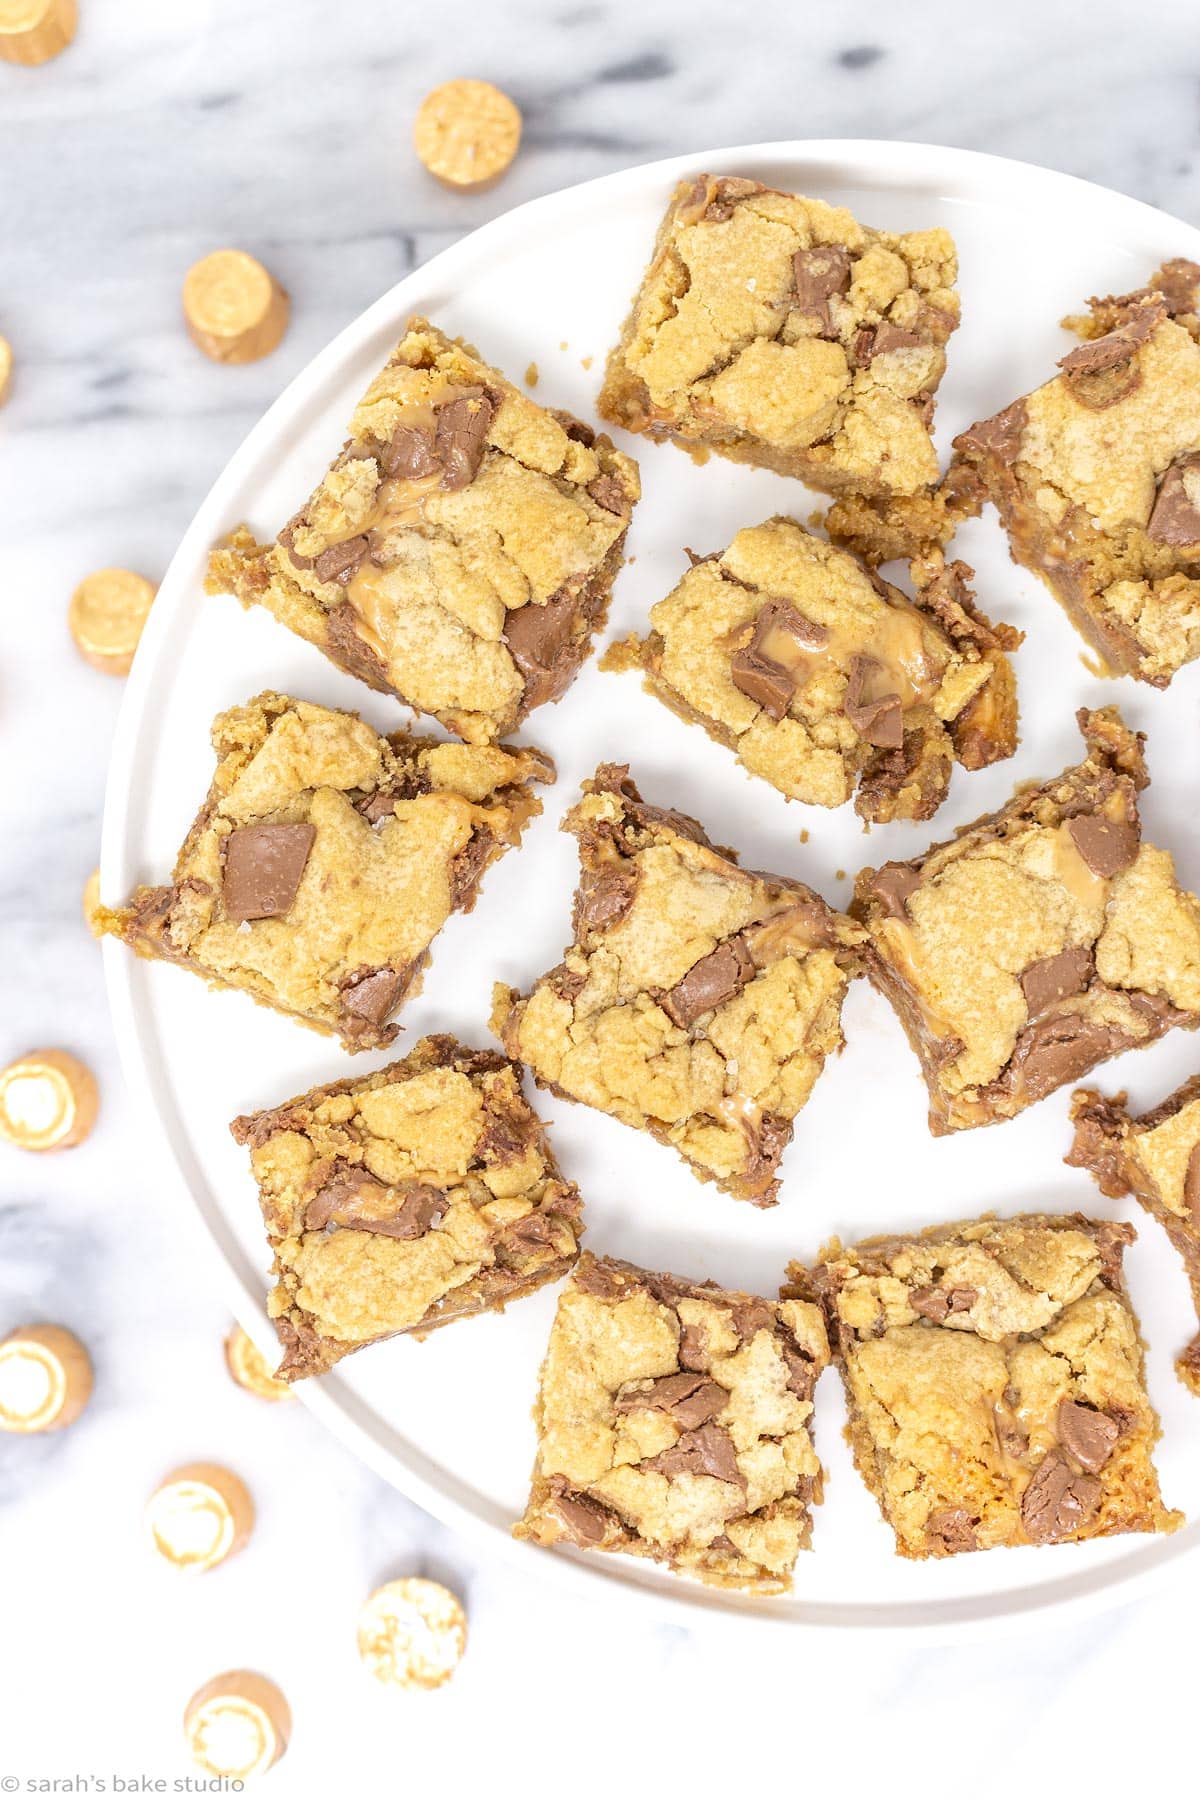 Salted Rolo Blondie Bars - soft and chewy vanilla brownies stuffed with Rolo Caramel Candies and sprinkled with coarse sea salt make these sweet and salty blondie bars magnificent.